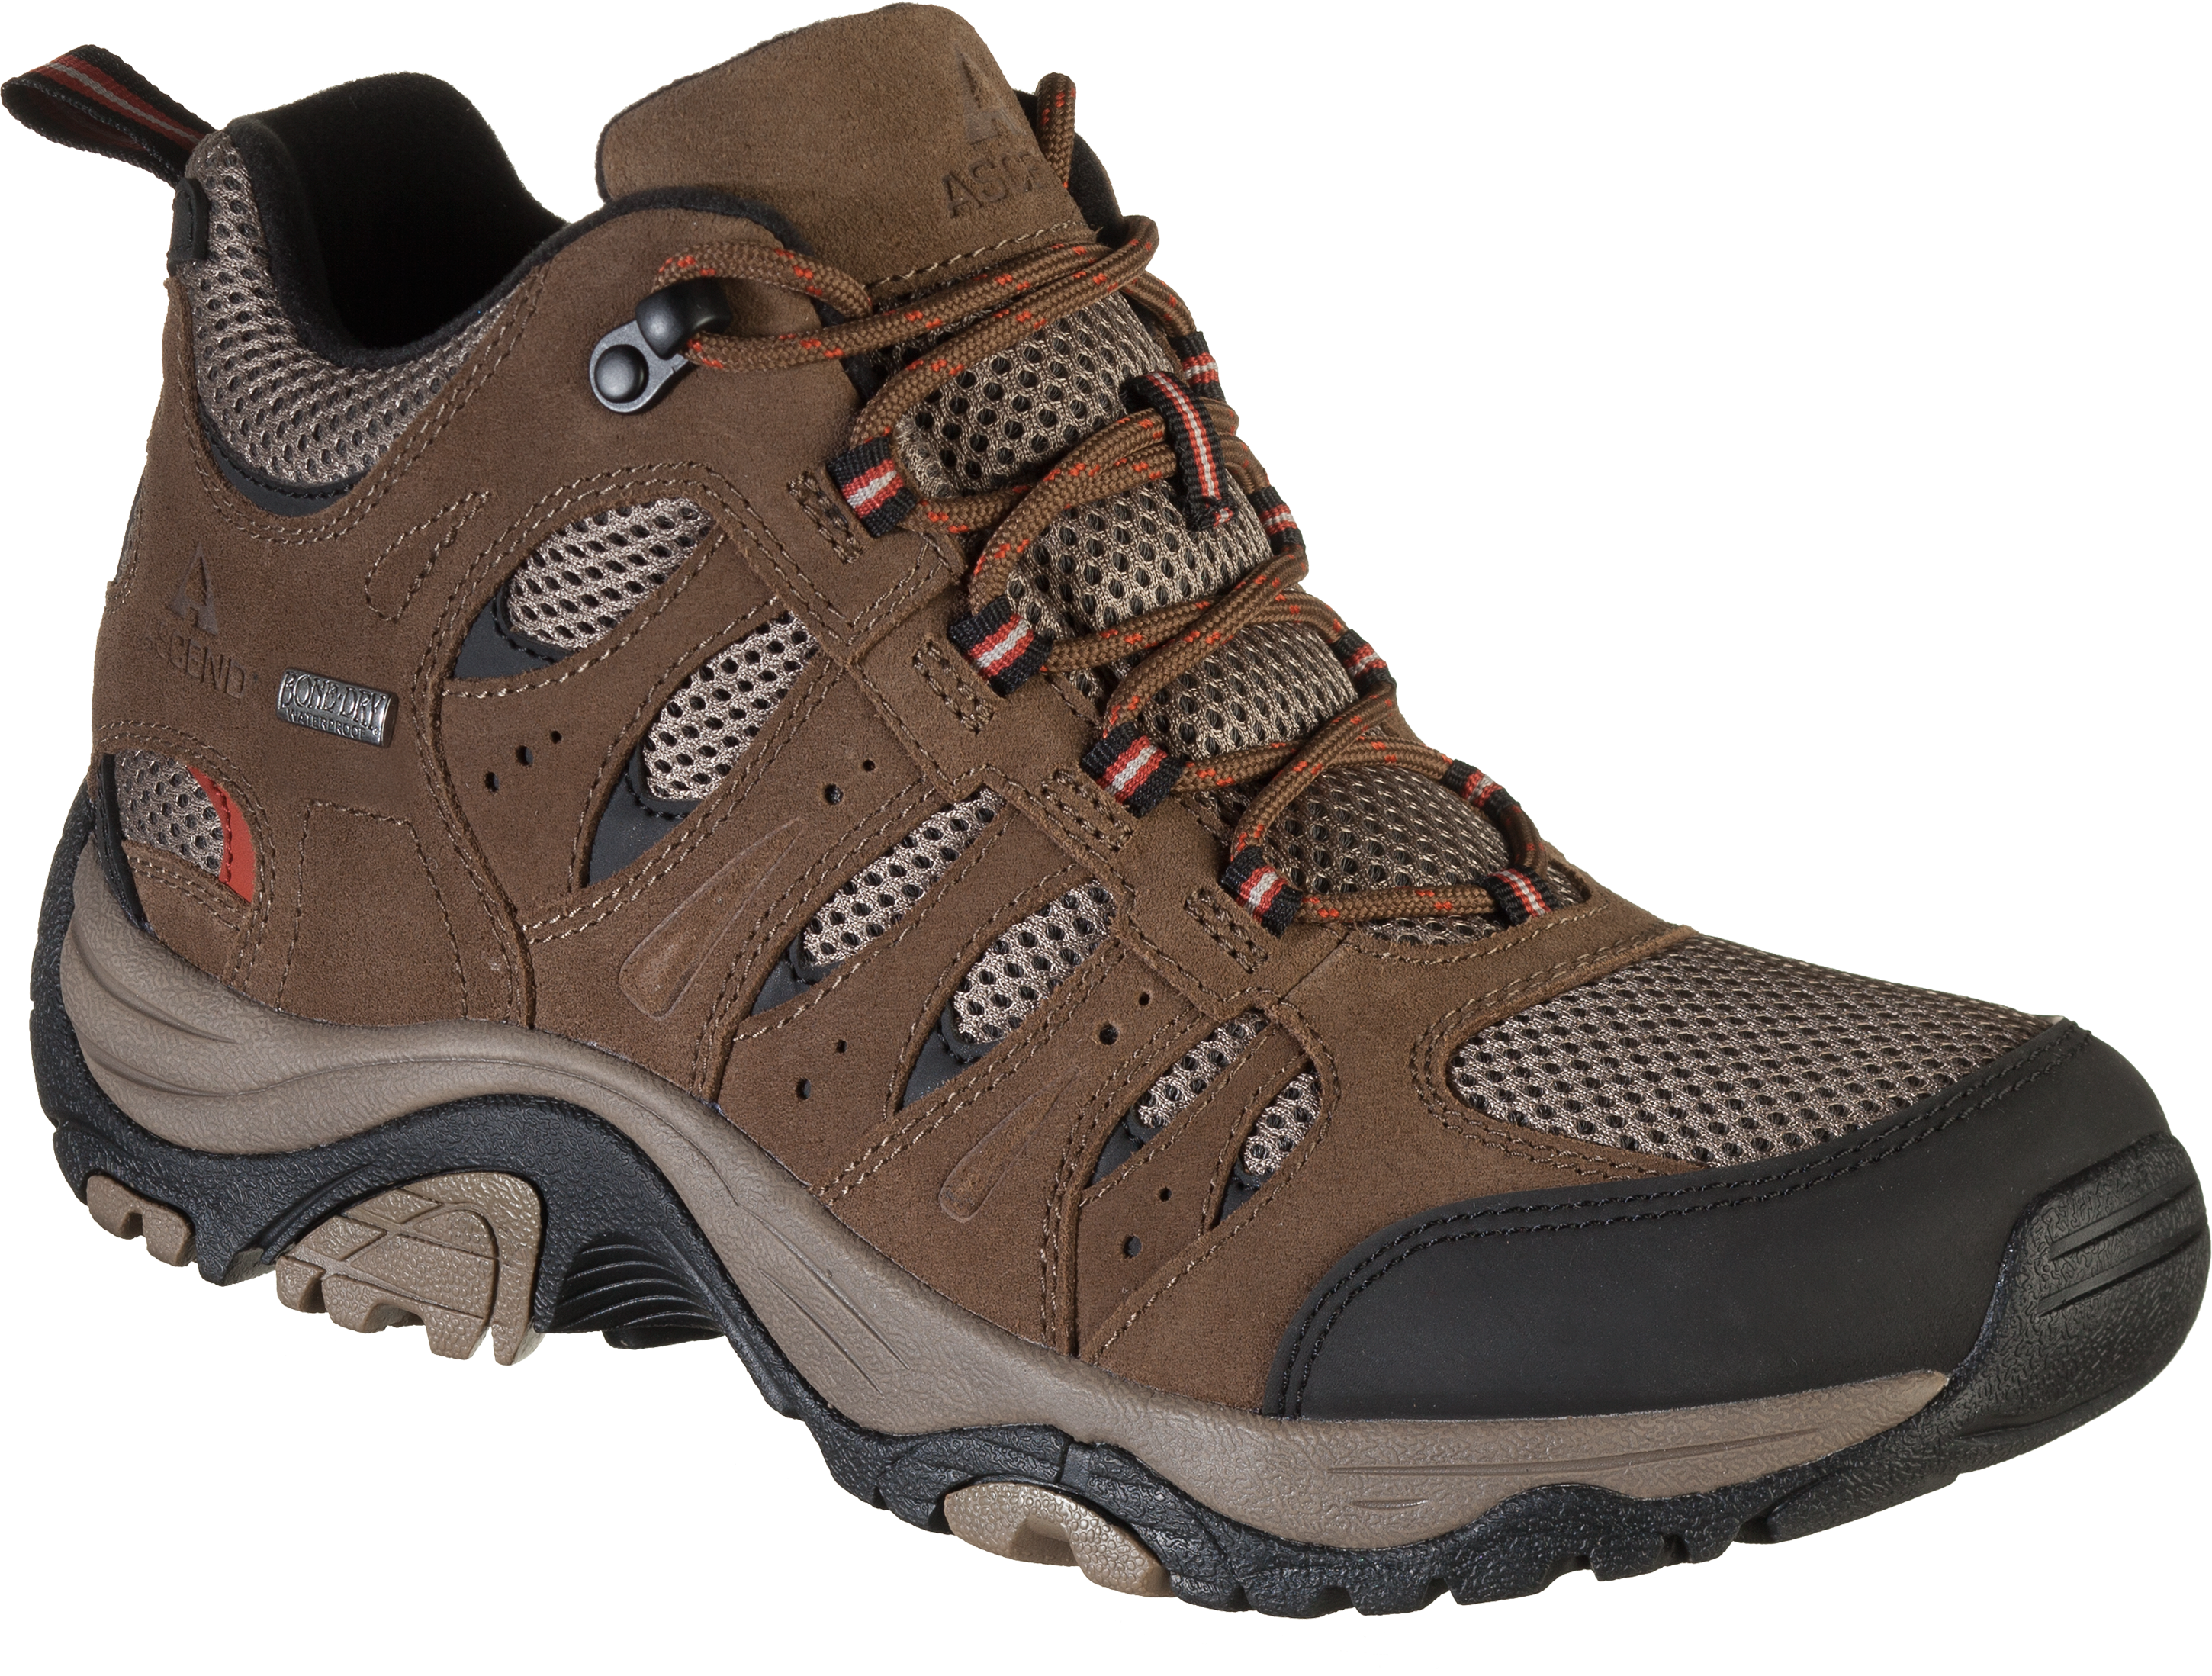 Ascend Lisco Mid Waterproof Hiking Boots for Men - Chocolate - 13M